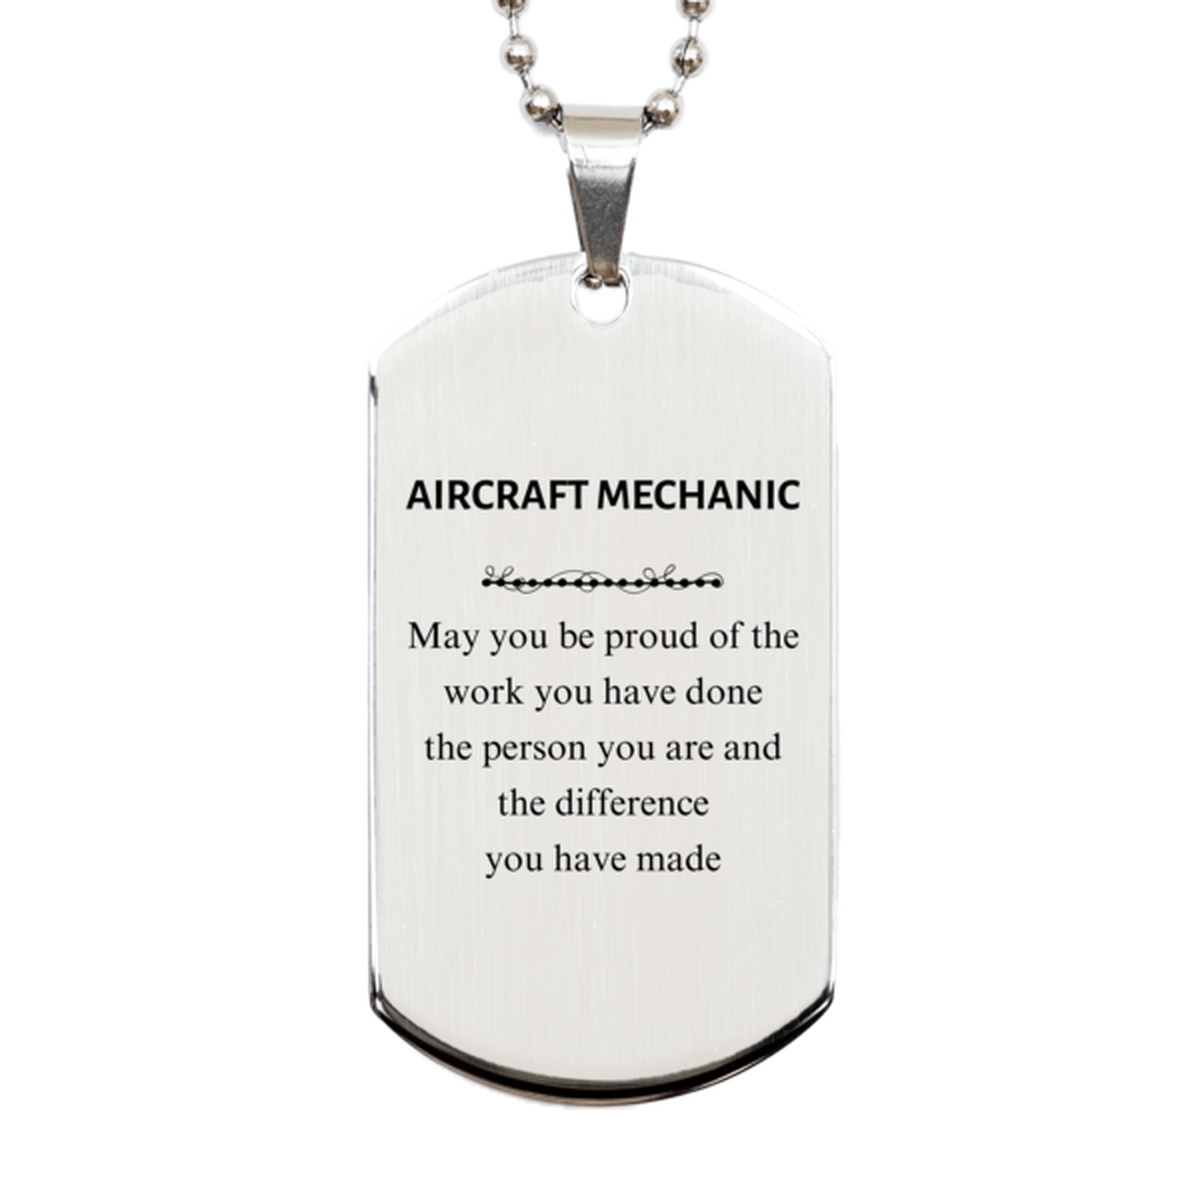 Aircraft Mechanic May you be proud of the work you have done, Retirement Aircraft Mechanic Silver Dog Tag for Colleague Appreciation Gifts Amazing for Aircraft Mechanic